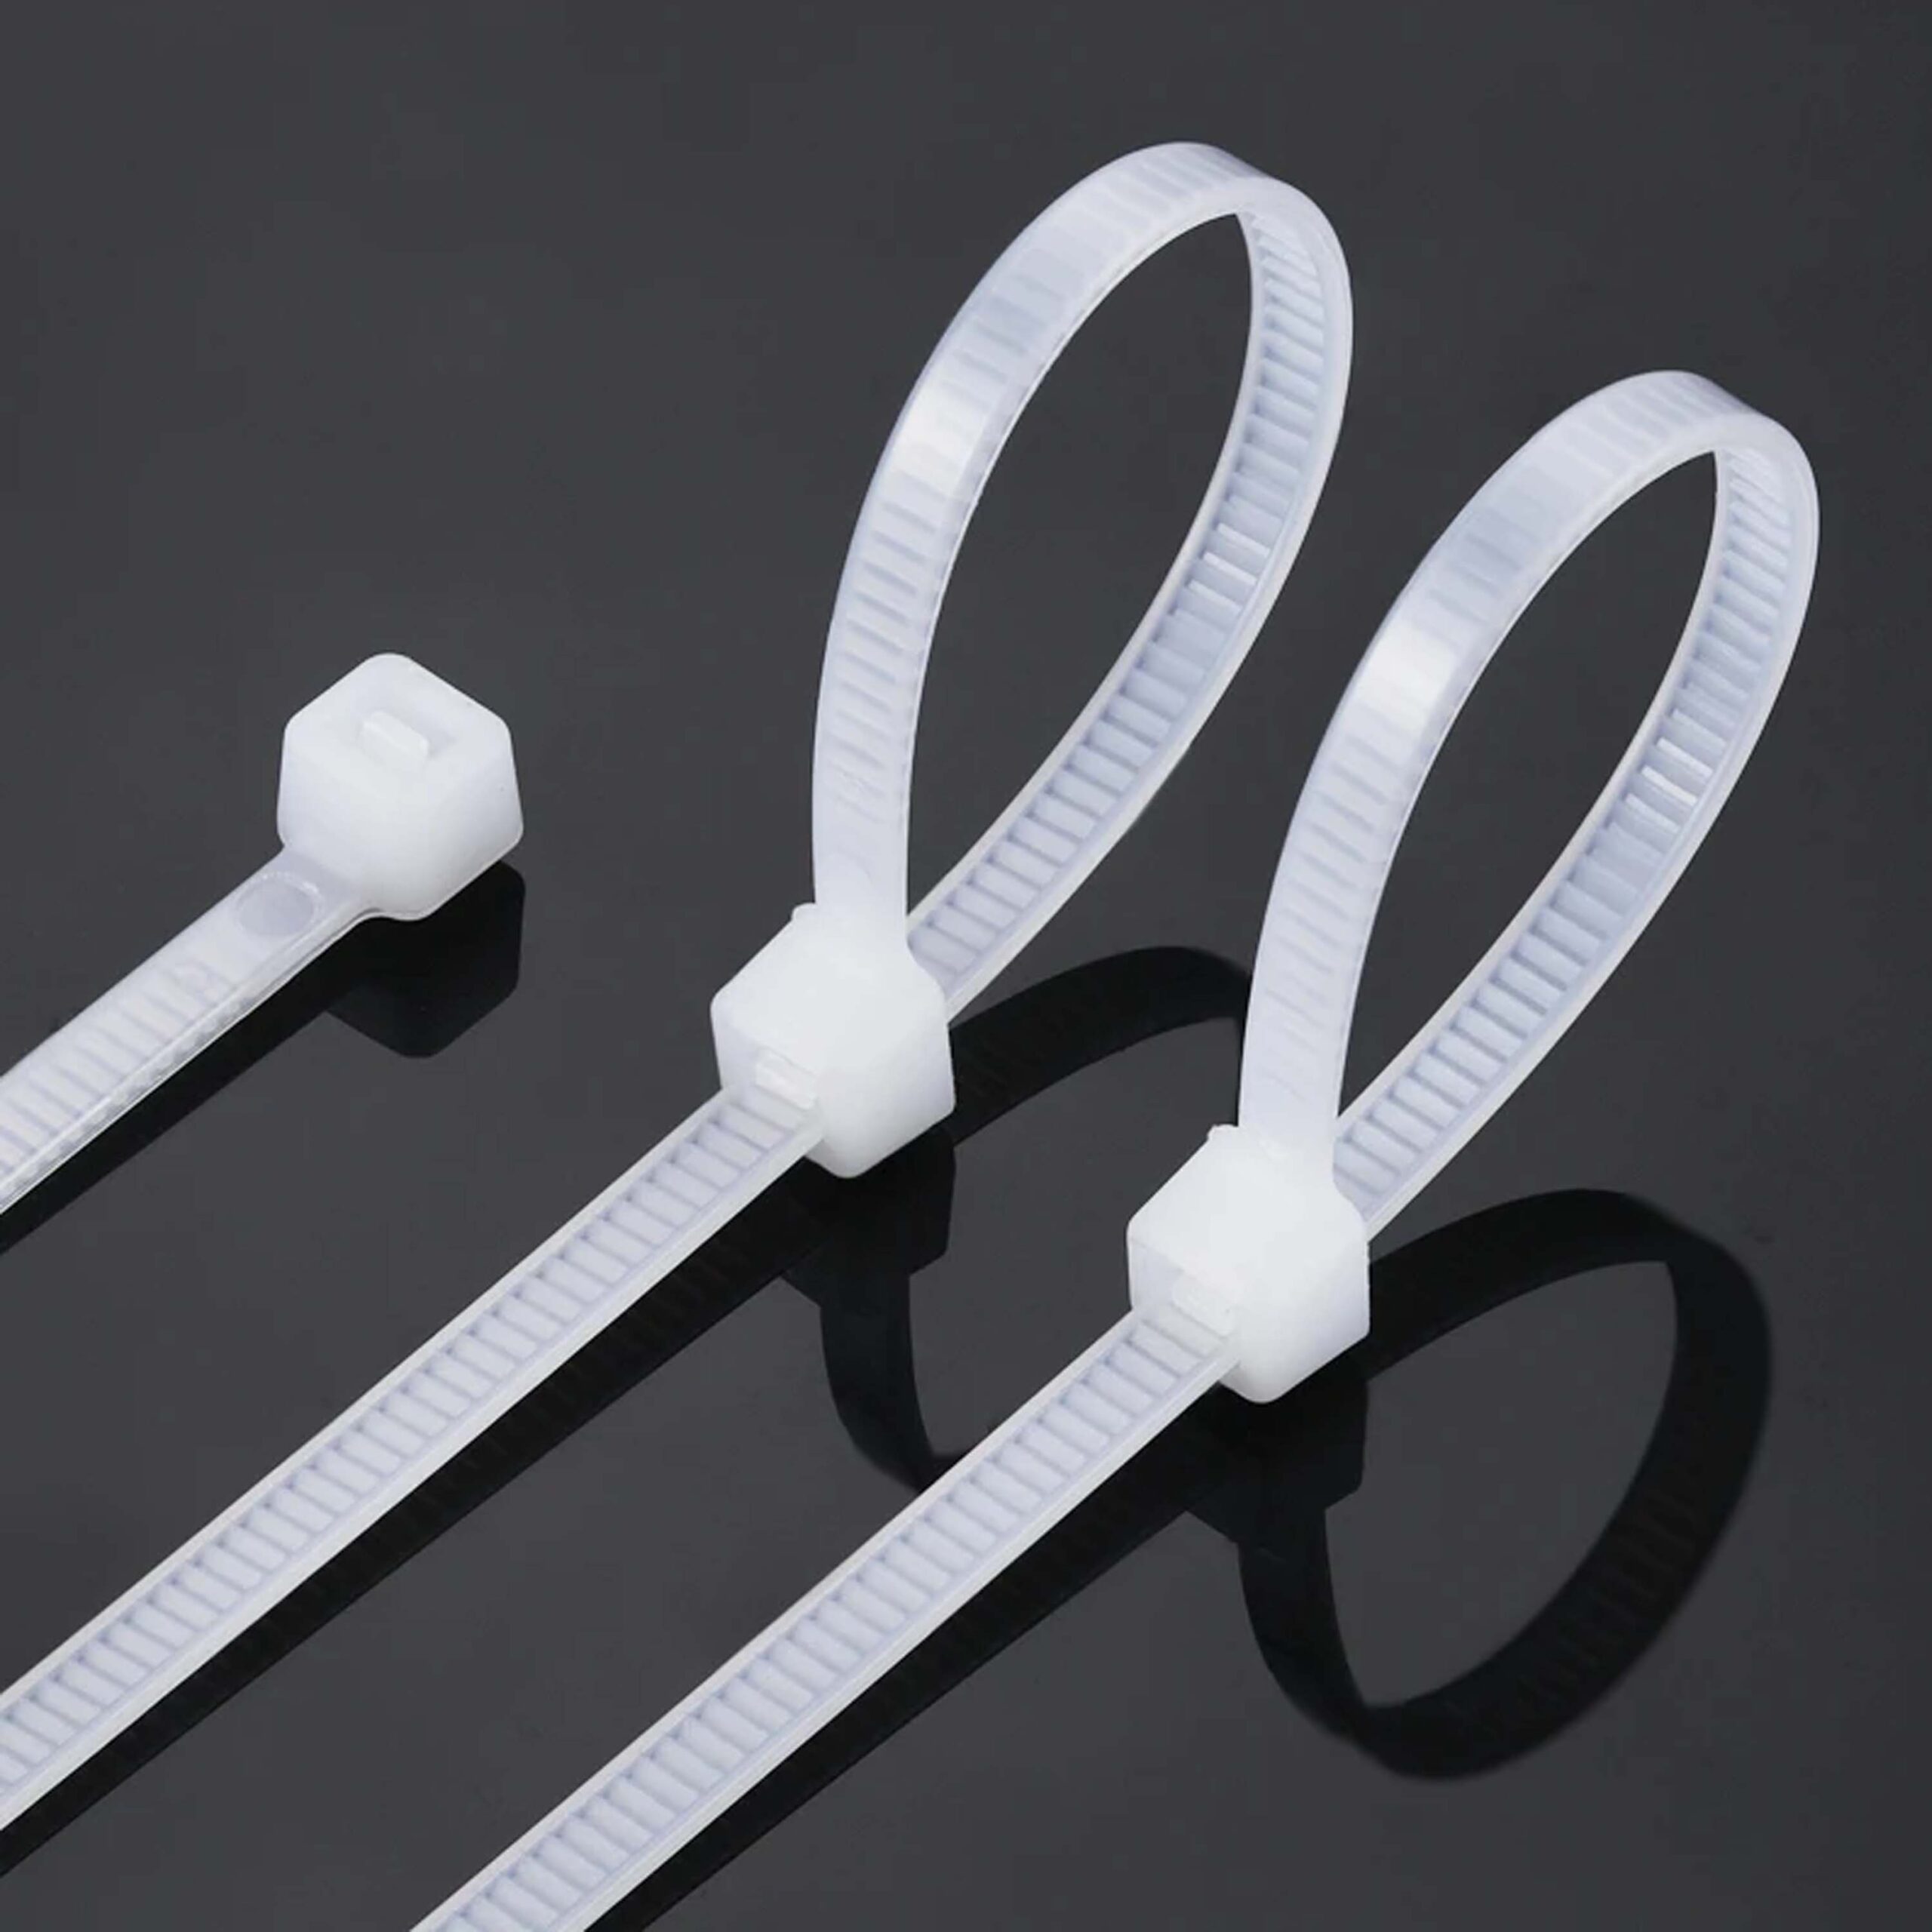 CABLE TIES 100mm
(1x100)